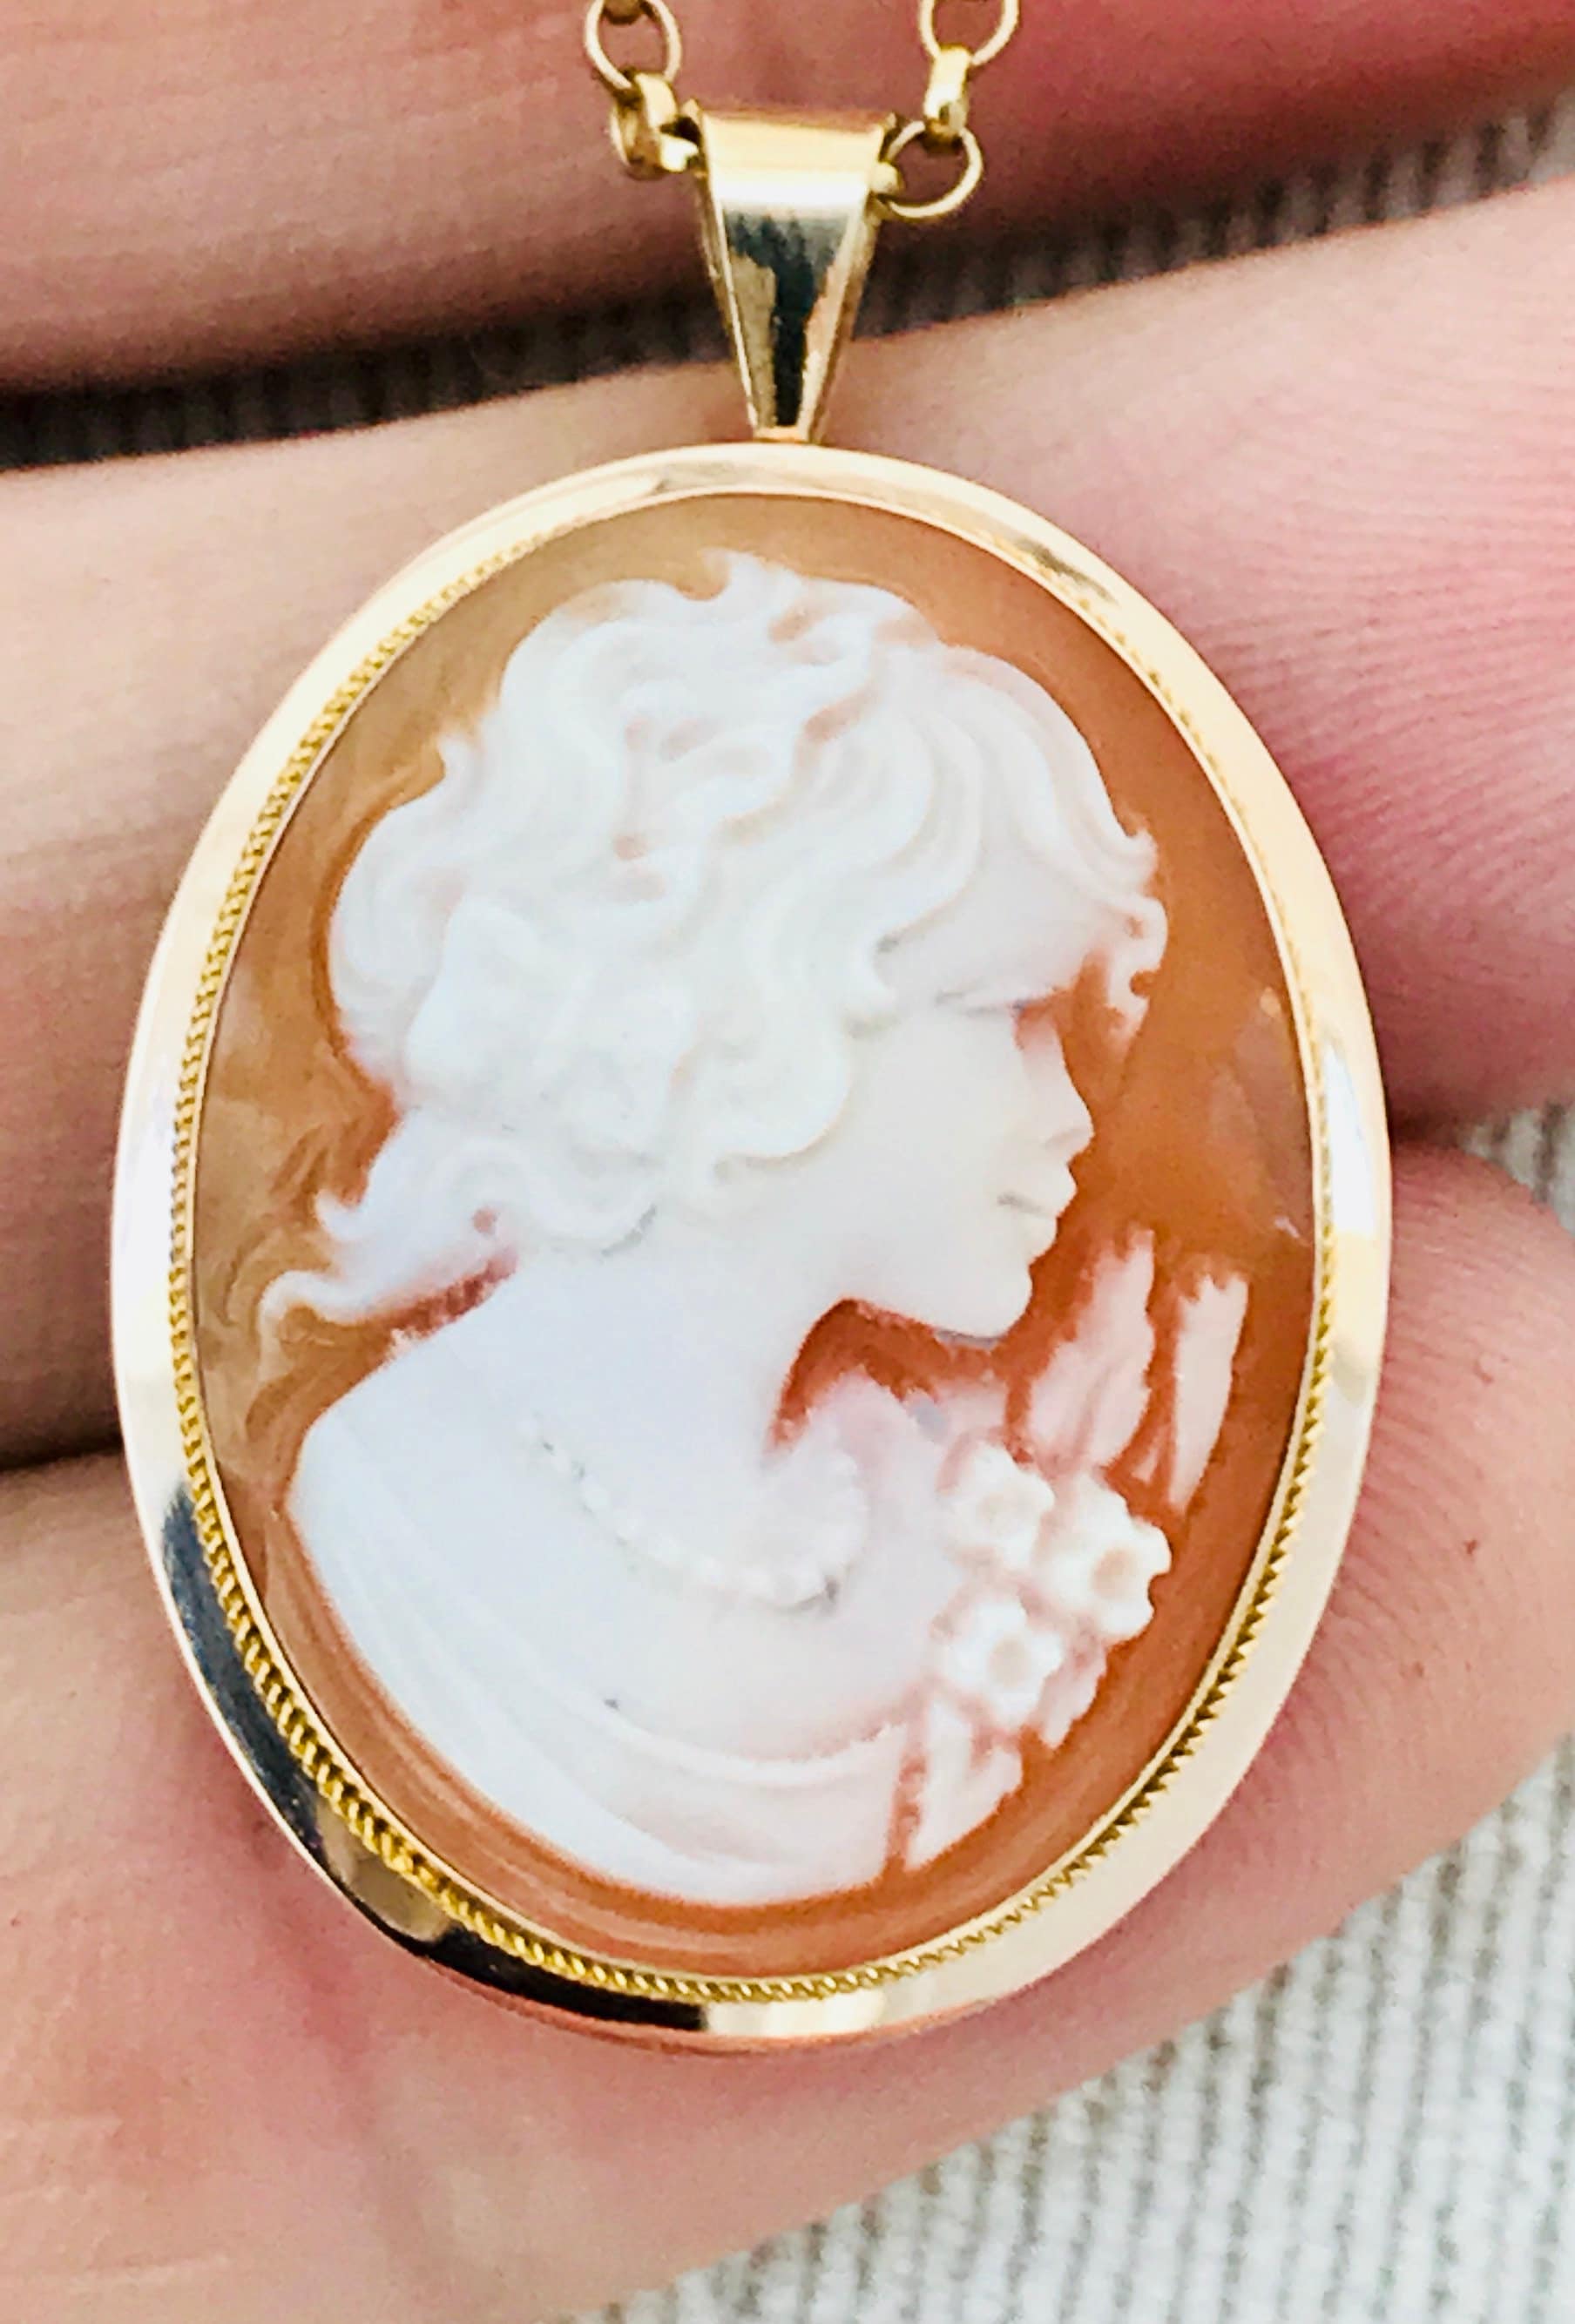 A Fabulous Beautifully Carved Vintage 9ct Gold Cameo Pendant Or Brooch